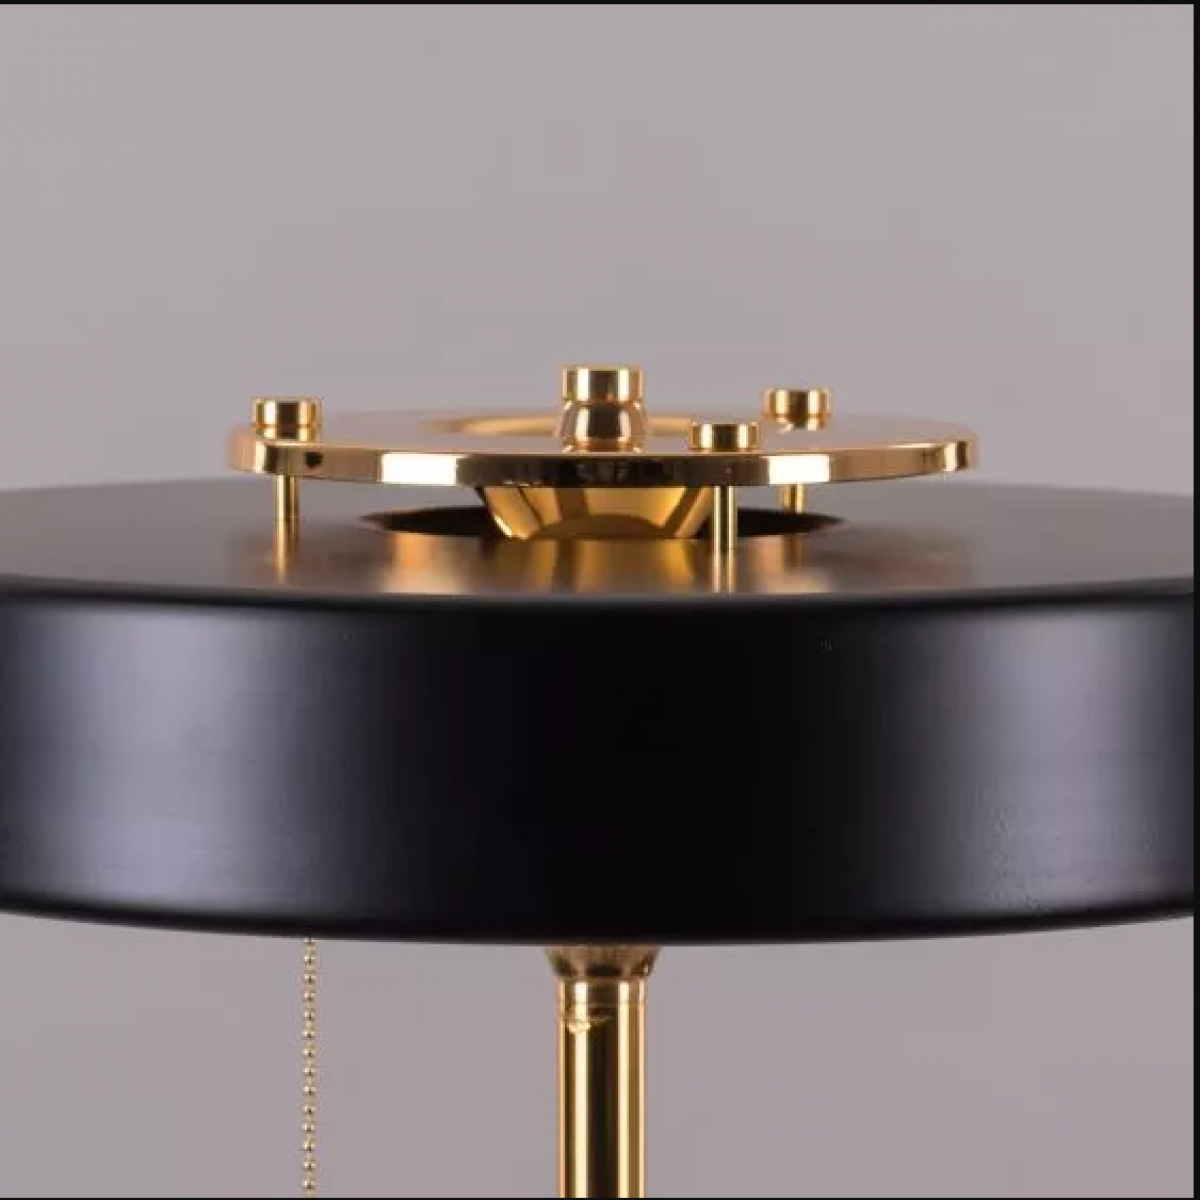 DISC TABLE LAMP